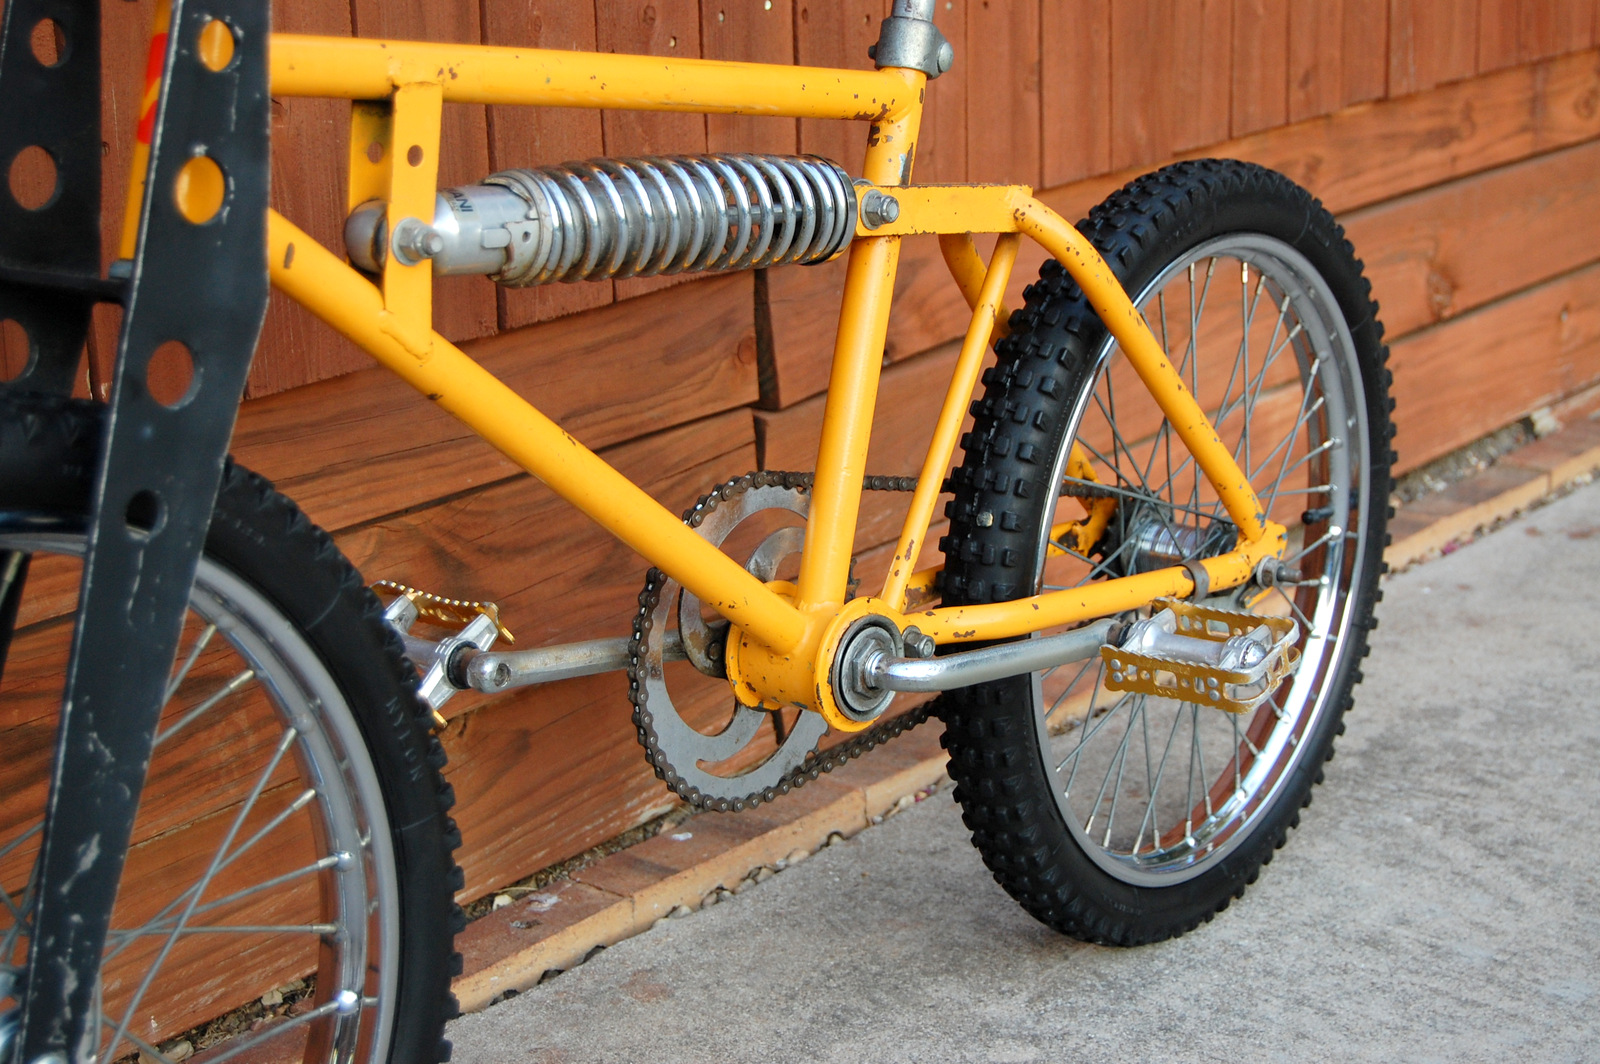 The All Suspension BMX Bike Thread - Page 5 - Riding, Research